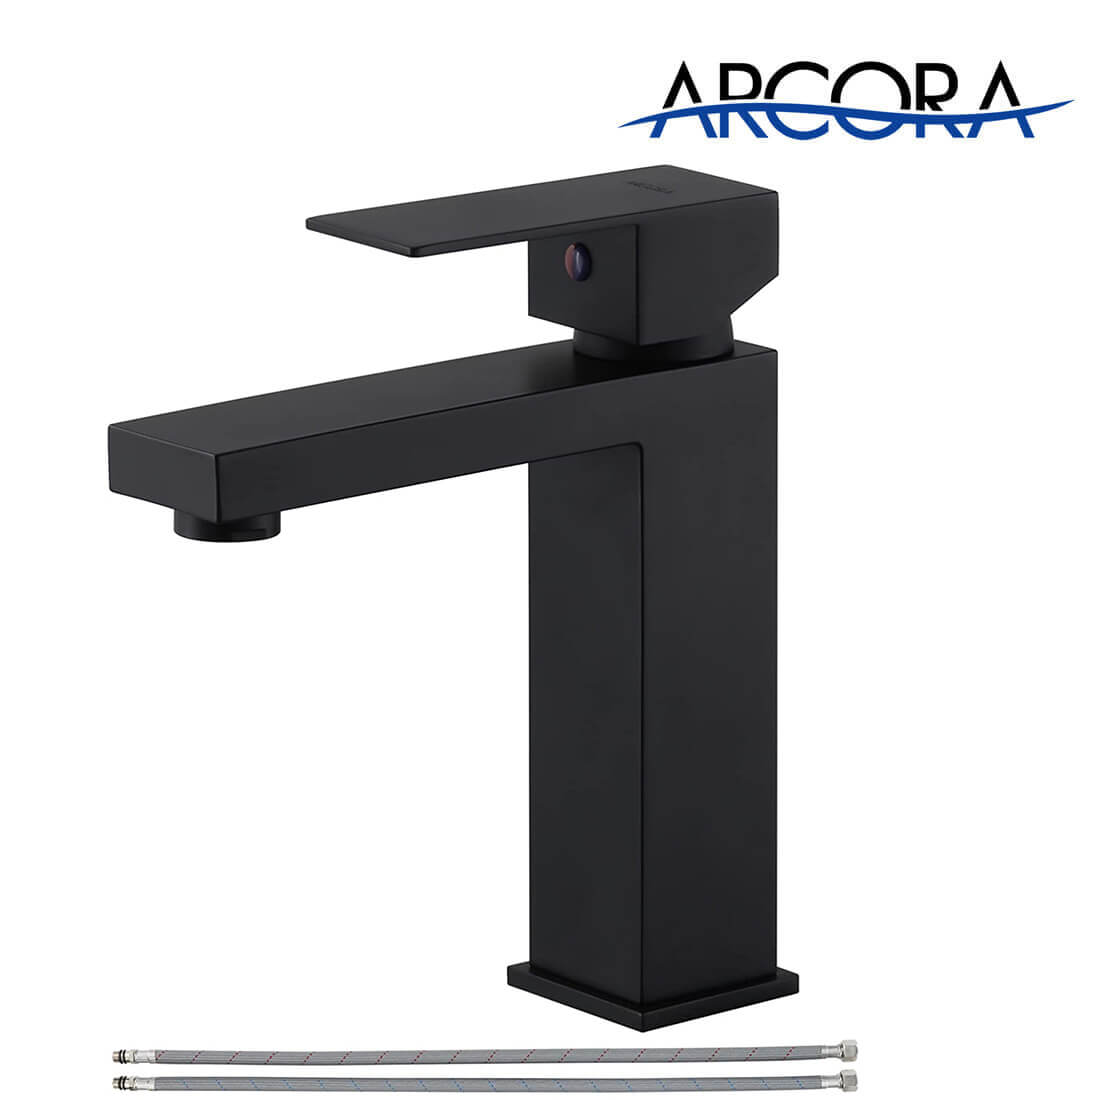 ARCORA Matte Black Single Hole Bathroom Faucet with cUPC Supply Lines